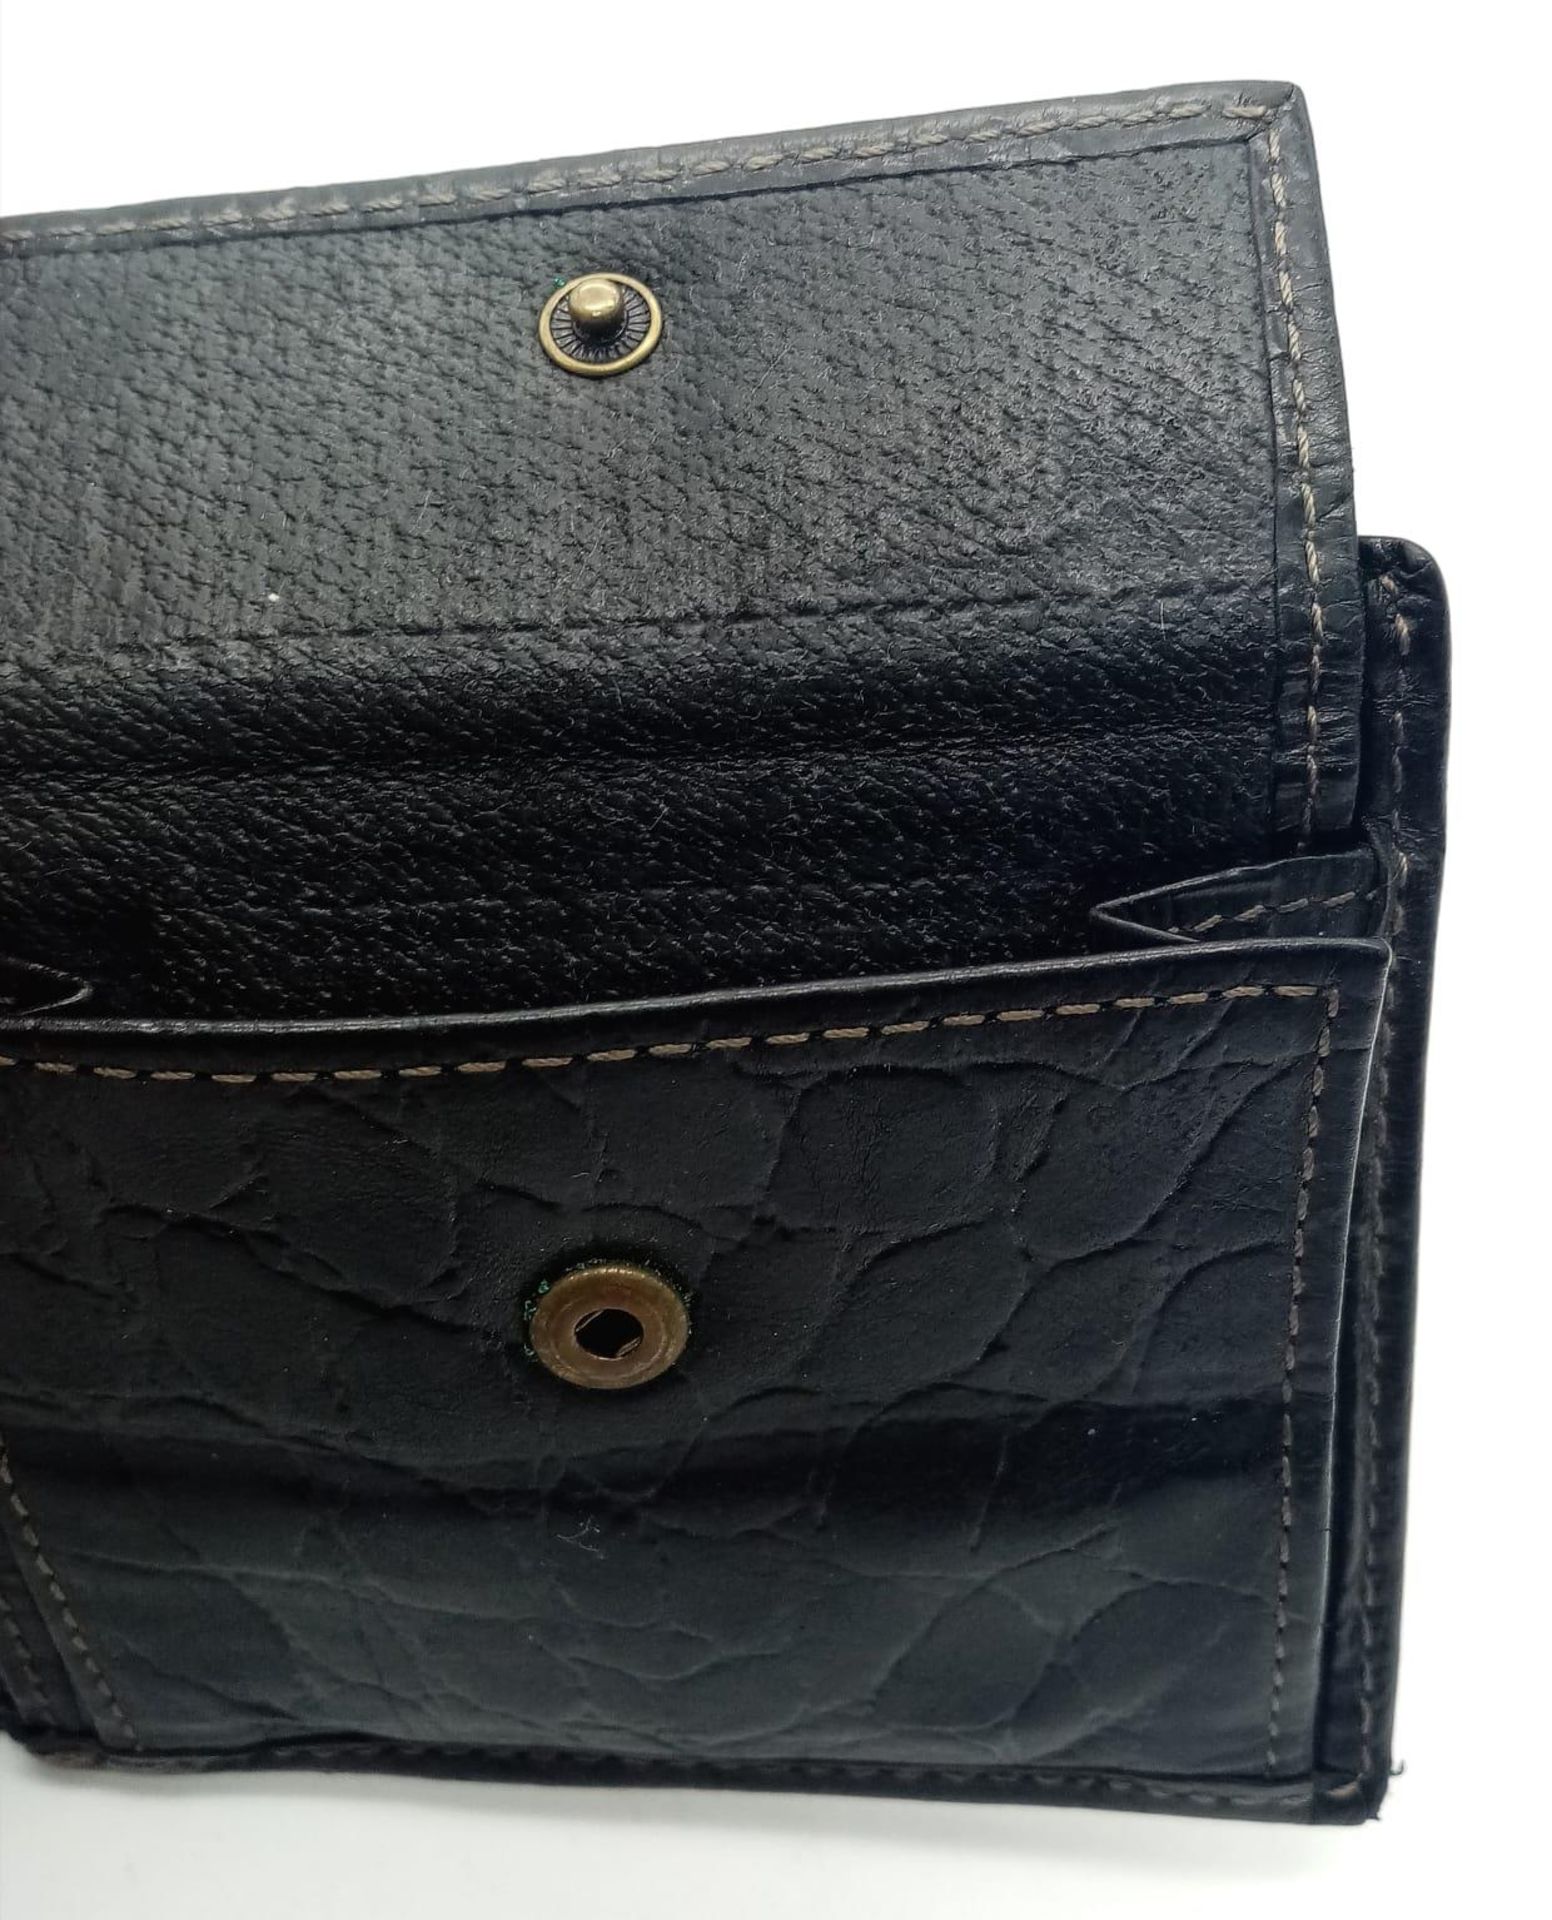 A black leather Mulberry wallet, can hold up to 8 cards, includes a coin pouch. Size approx. 11x9cm. - Image 4 of 6